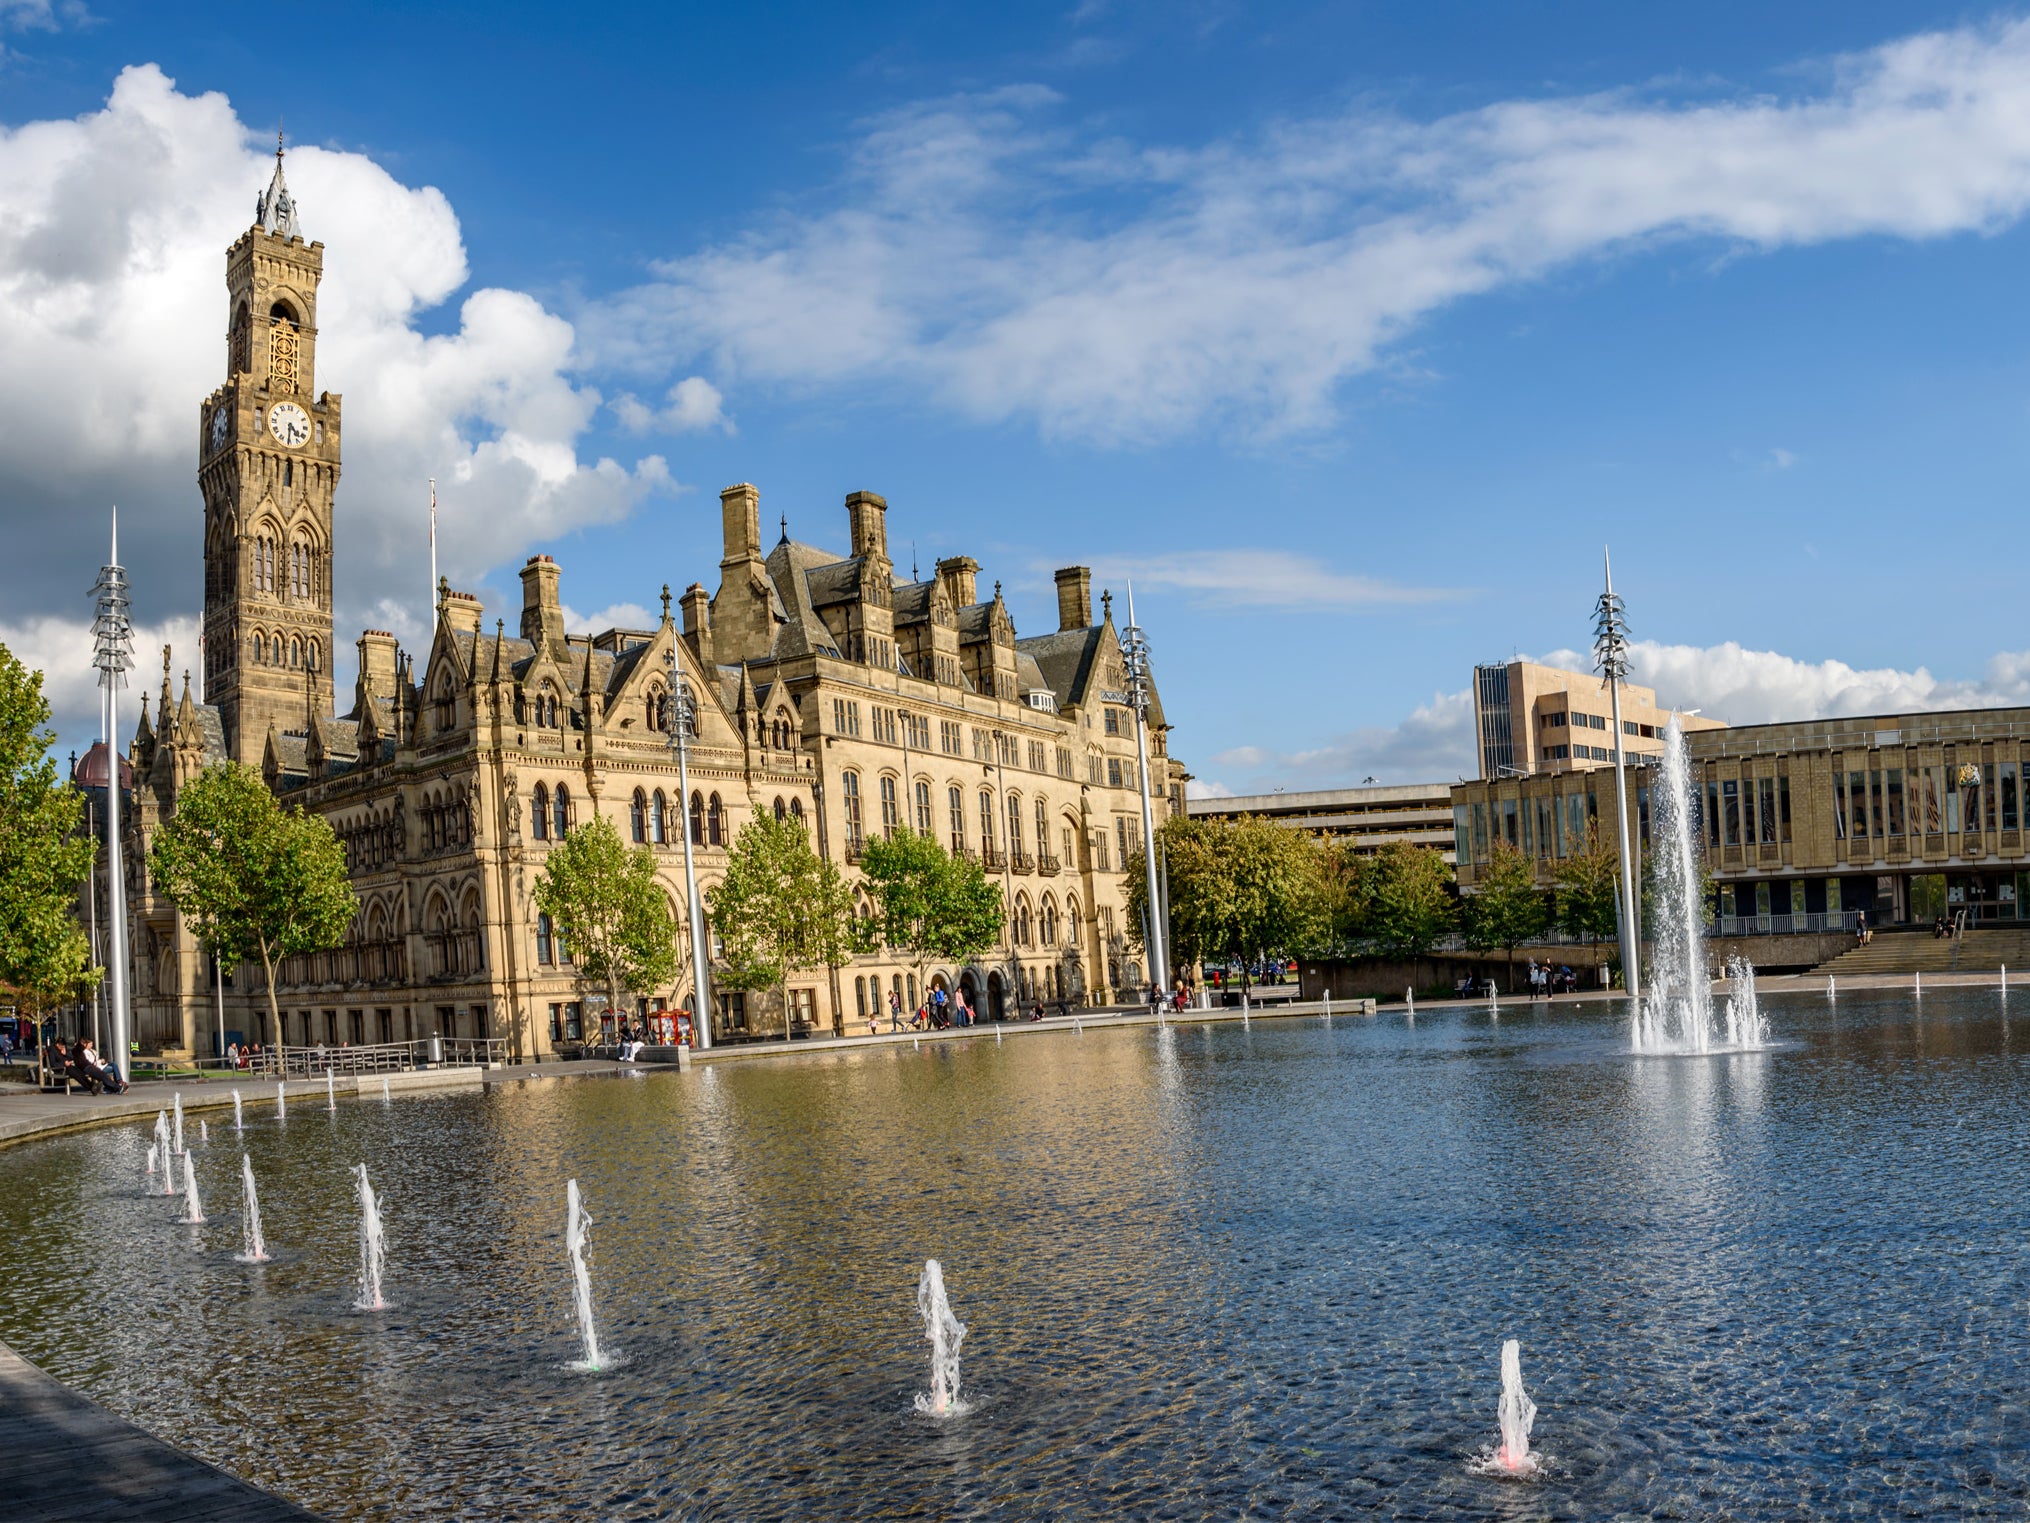 Clocking in: Bradford Town Hall is a Grade I-listed building